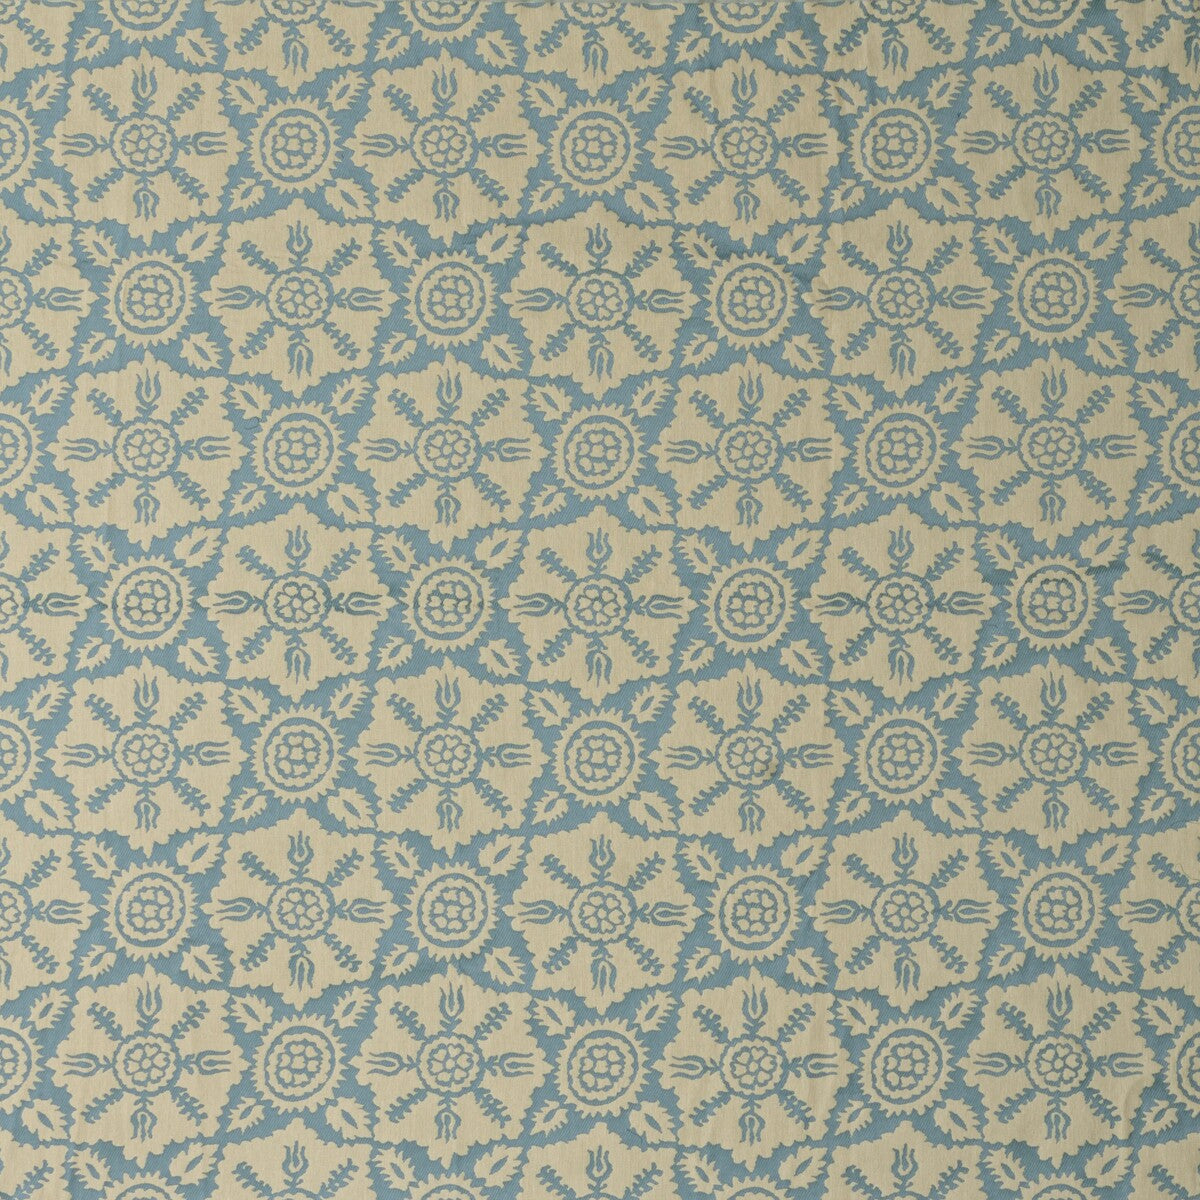 Ormond fabric in aquamarine color - pattern BFC-3679.13.0 - by Lee Jofa in the Blithfield collection